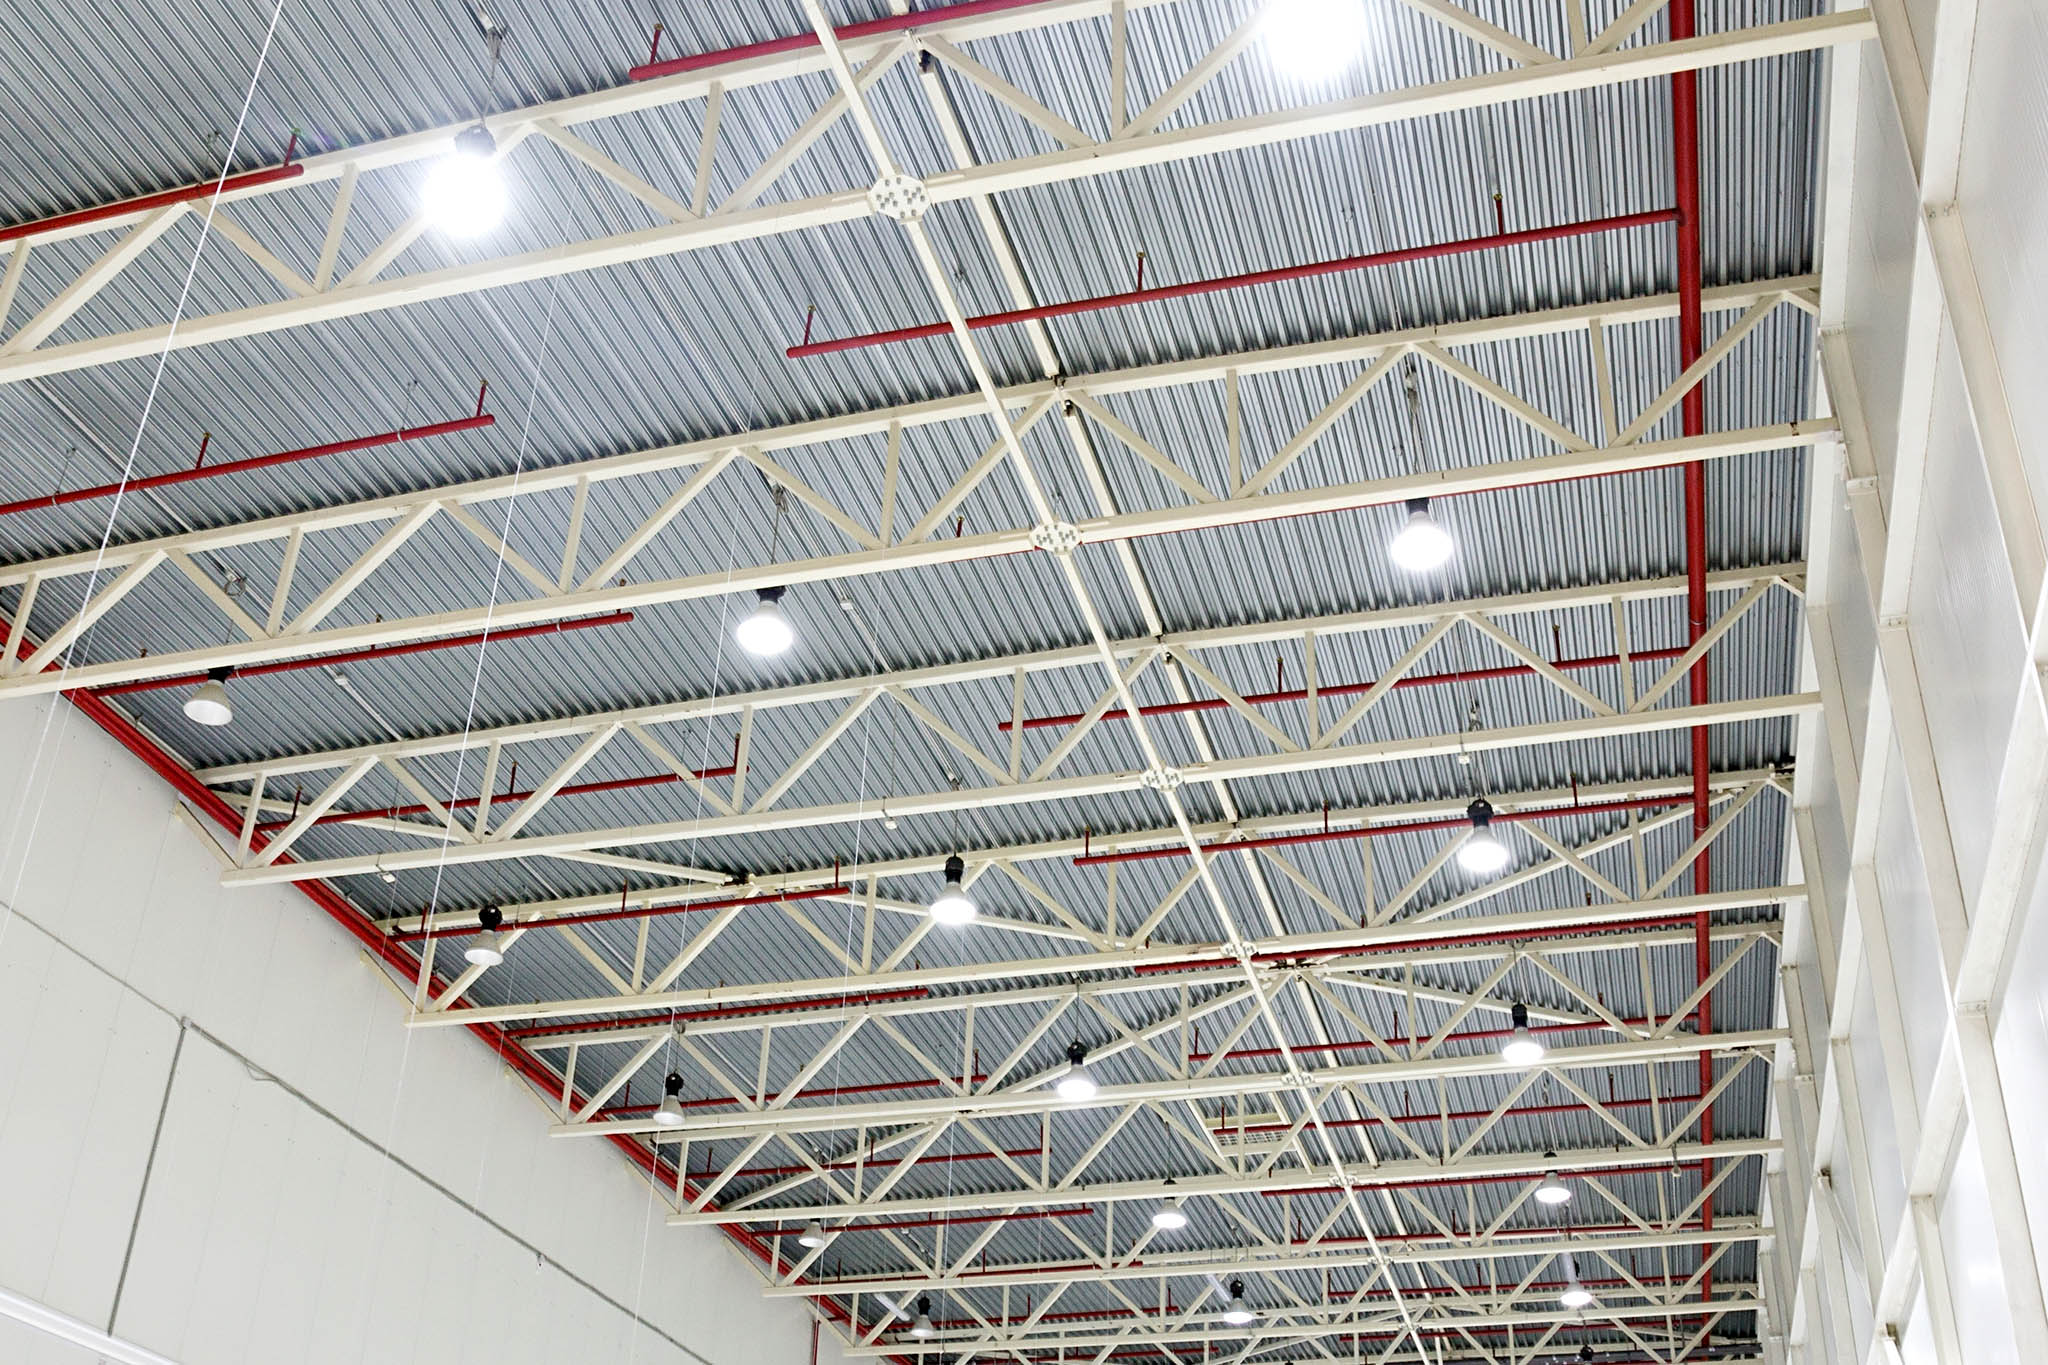 Inside Ceiling of Cold Storage Facility